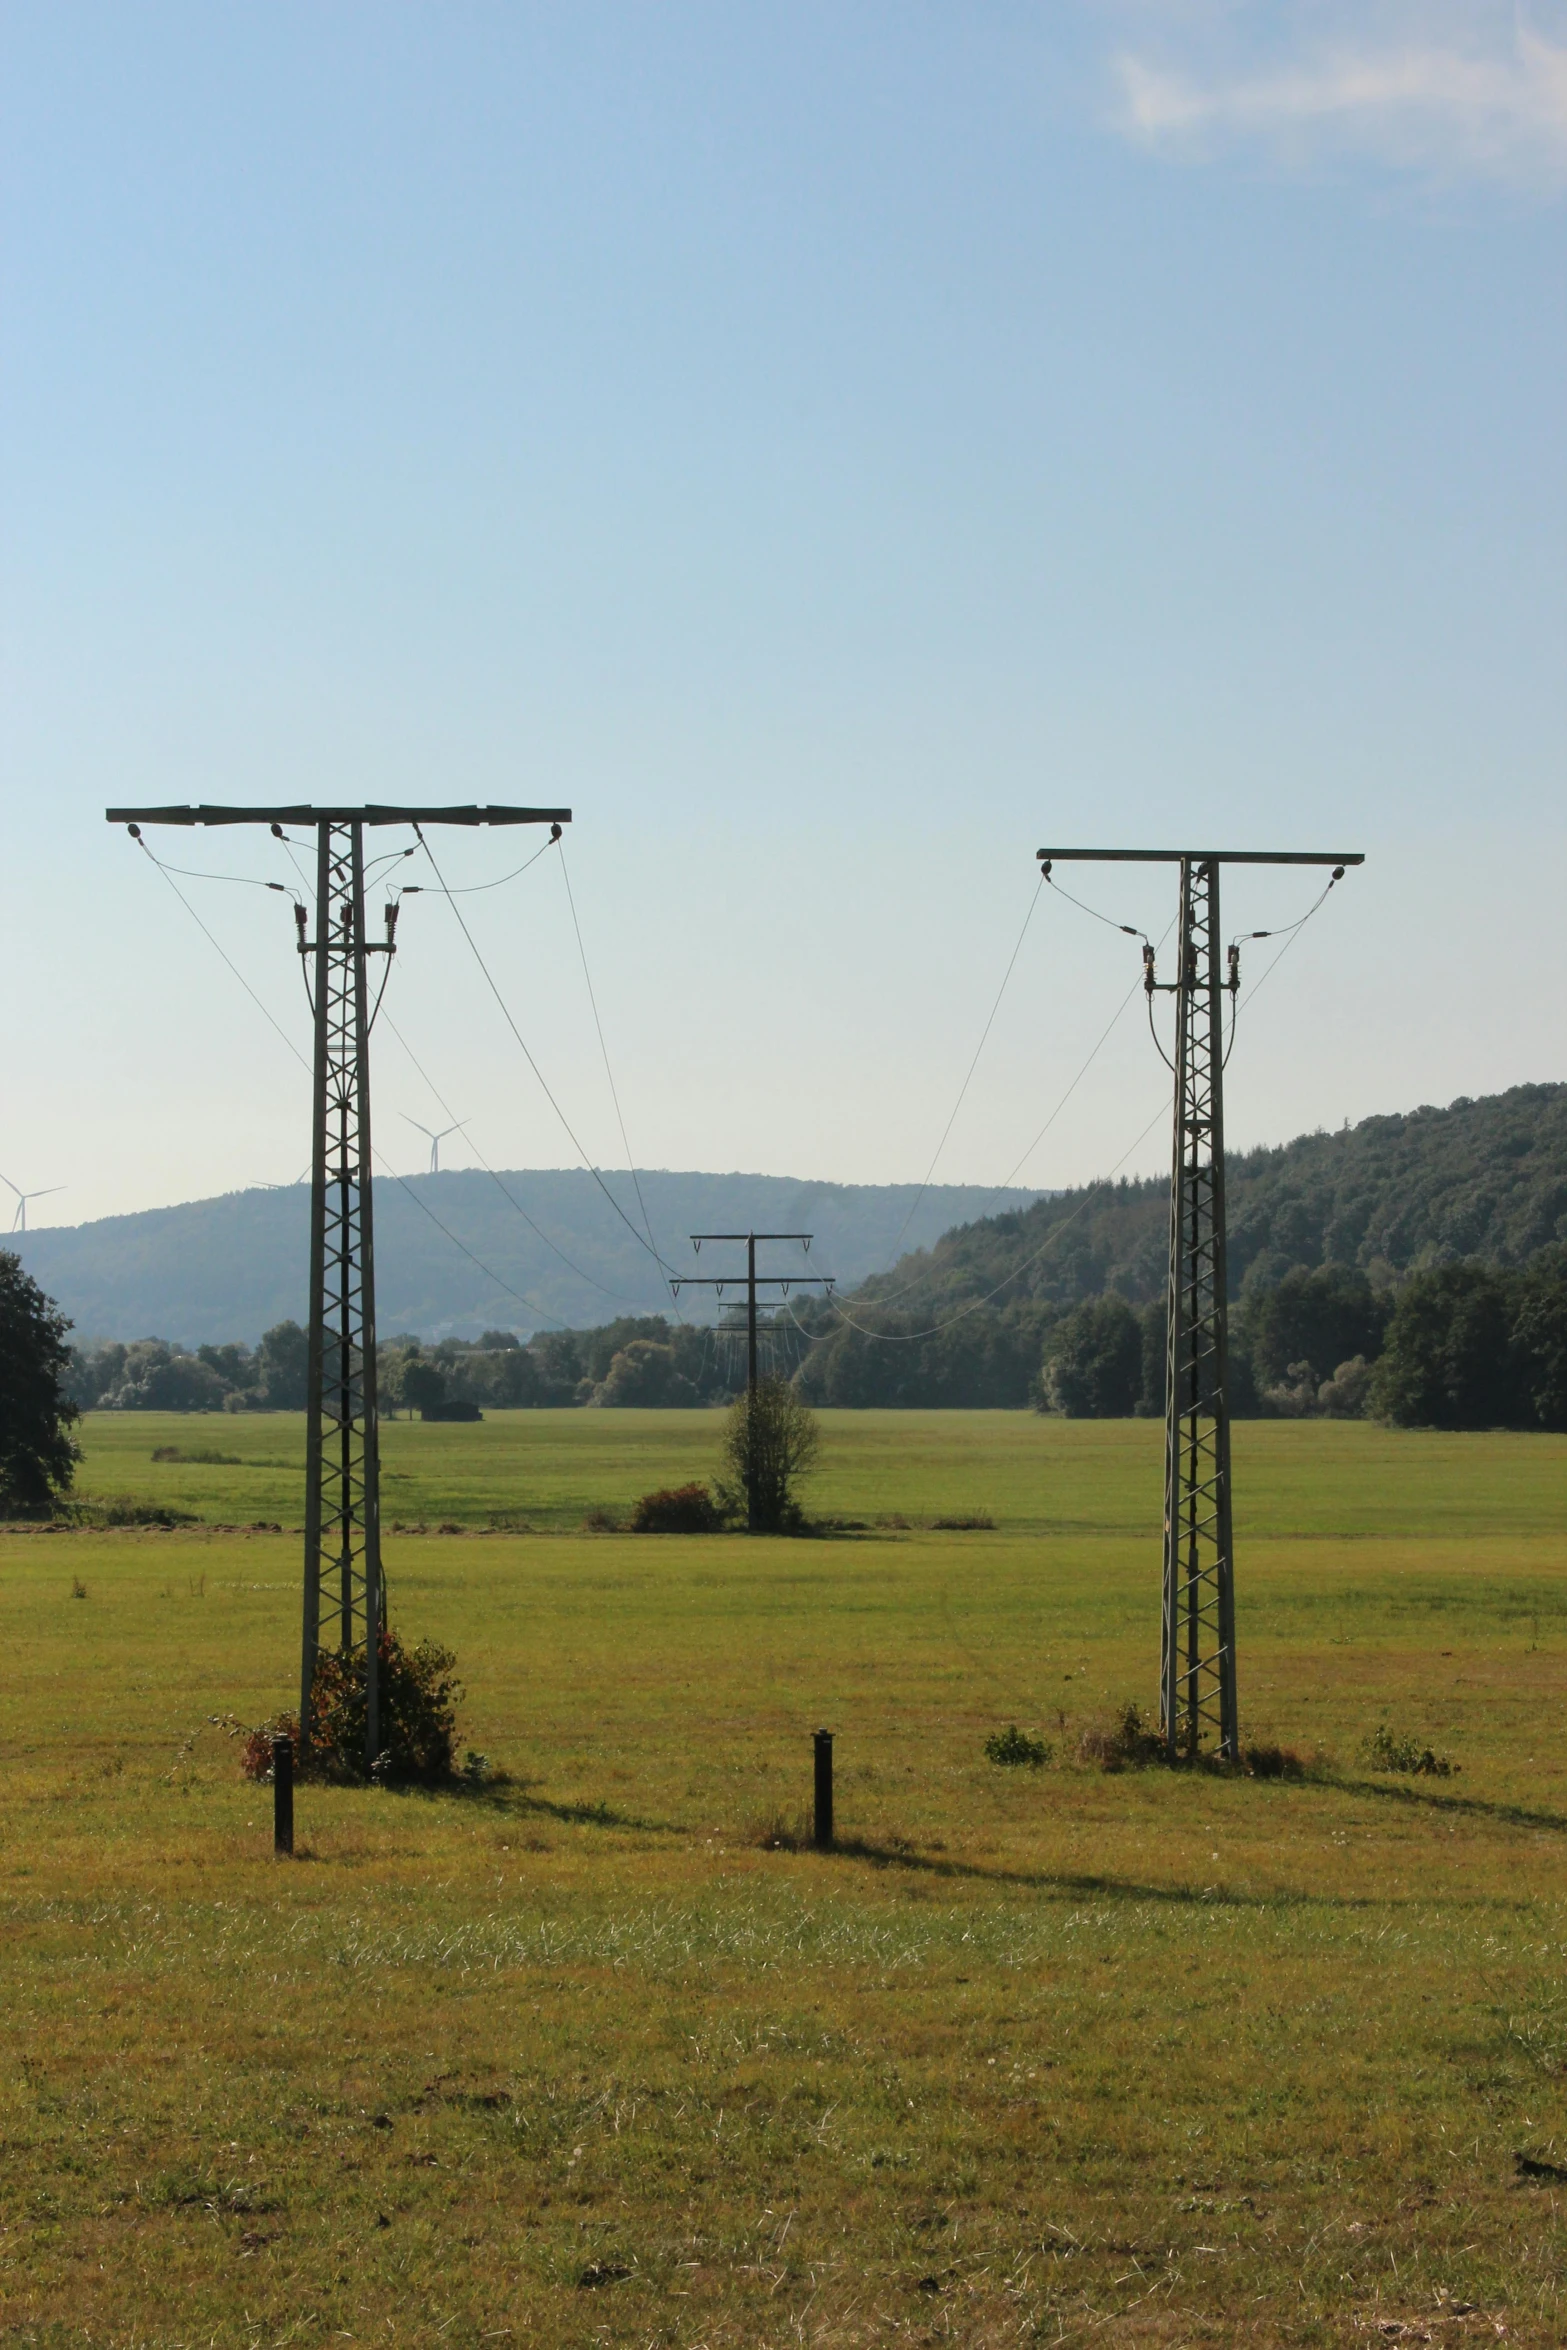 electric power lines at the edge of a large open field